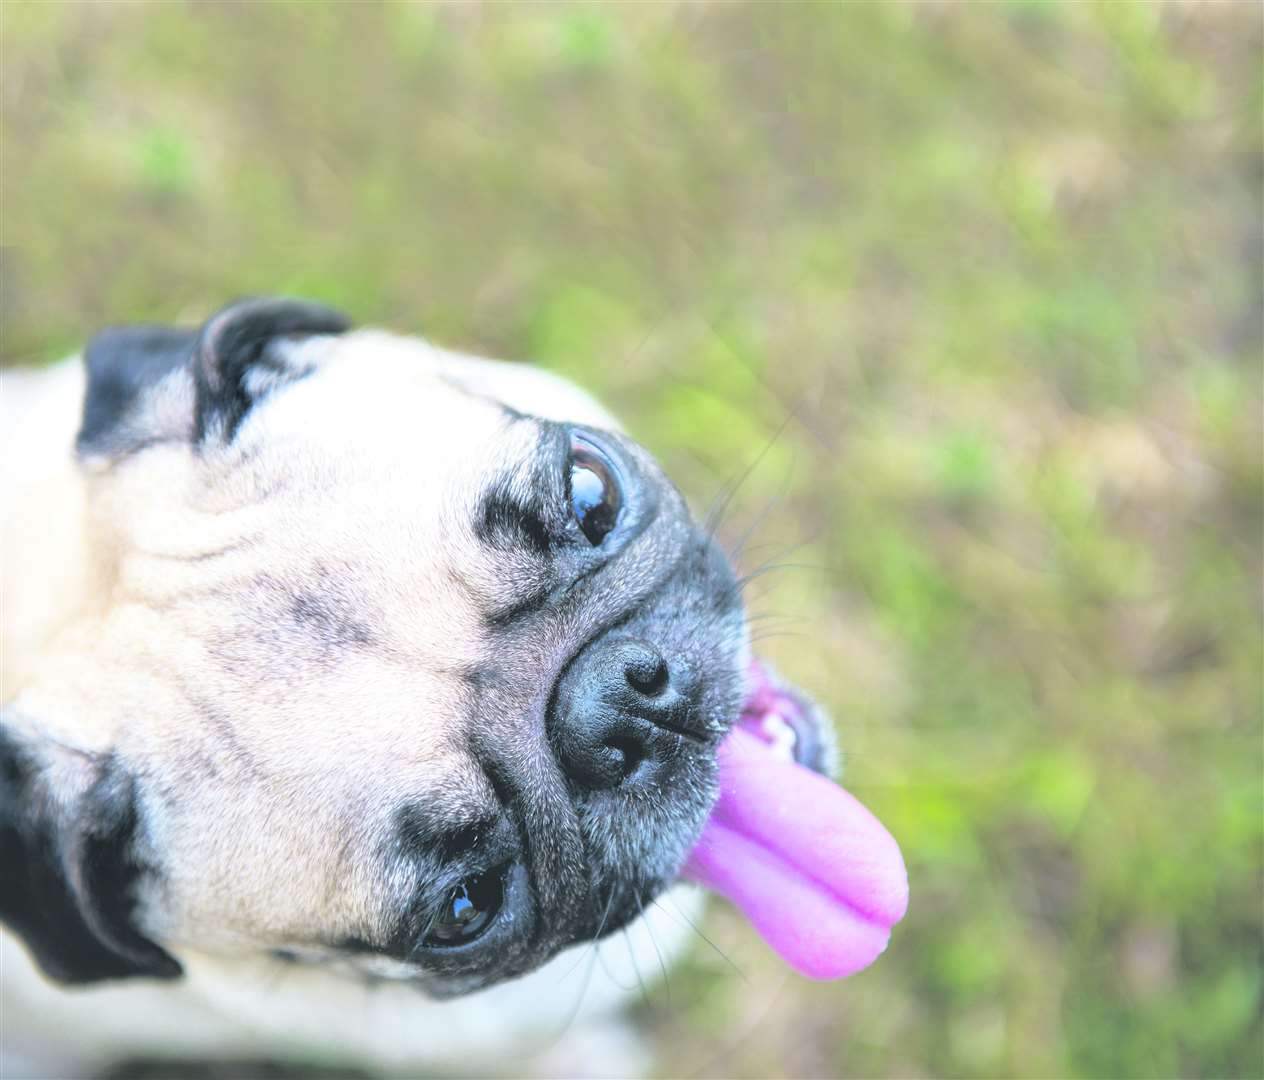 The hashtag #pug features in millions of posts. Image: iStock.